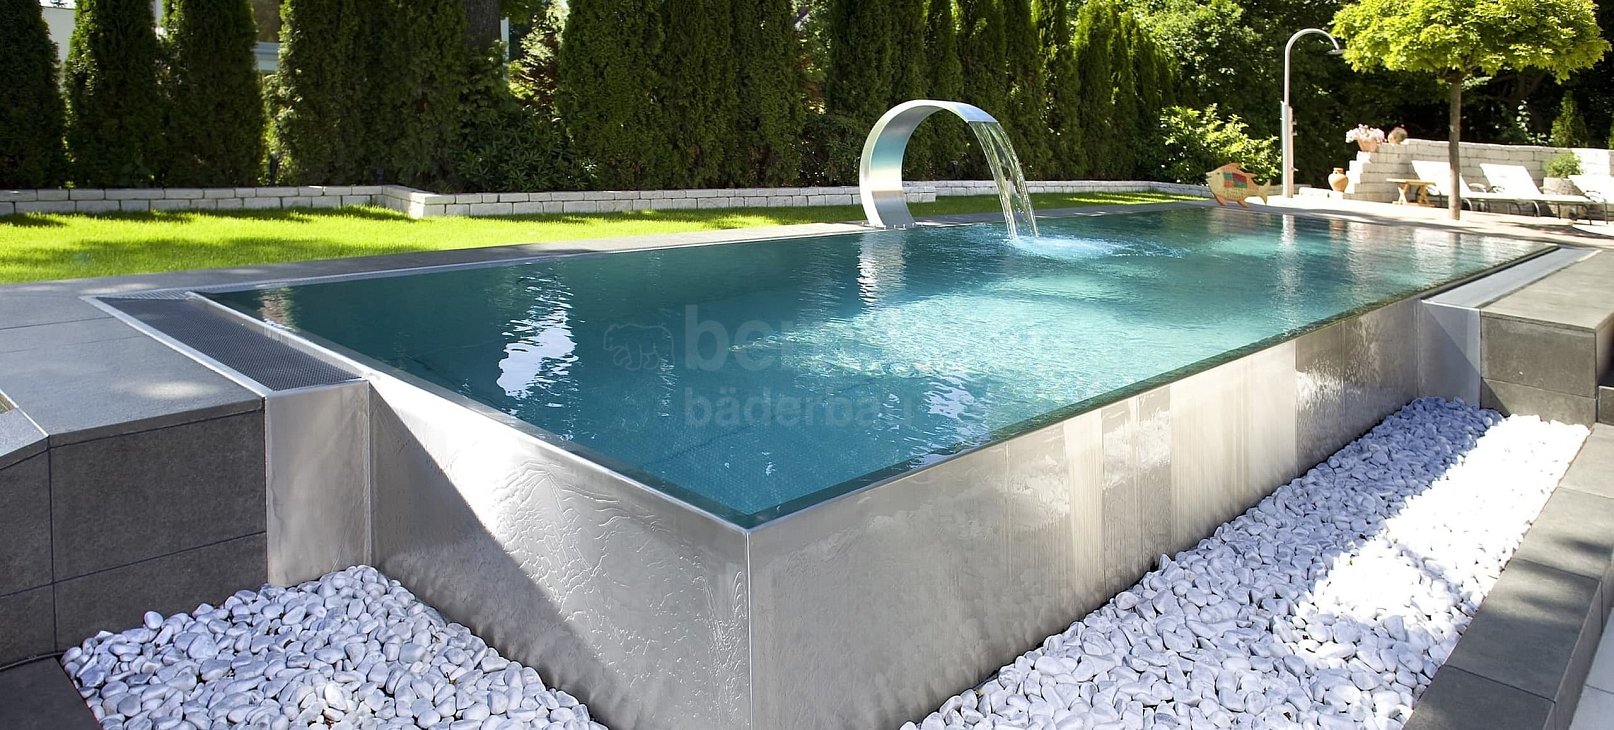 Privat pool with infinity overflow Schondorf